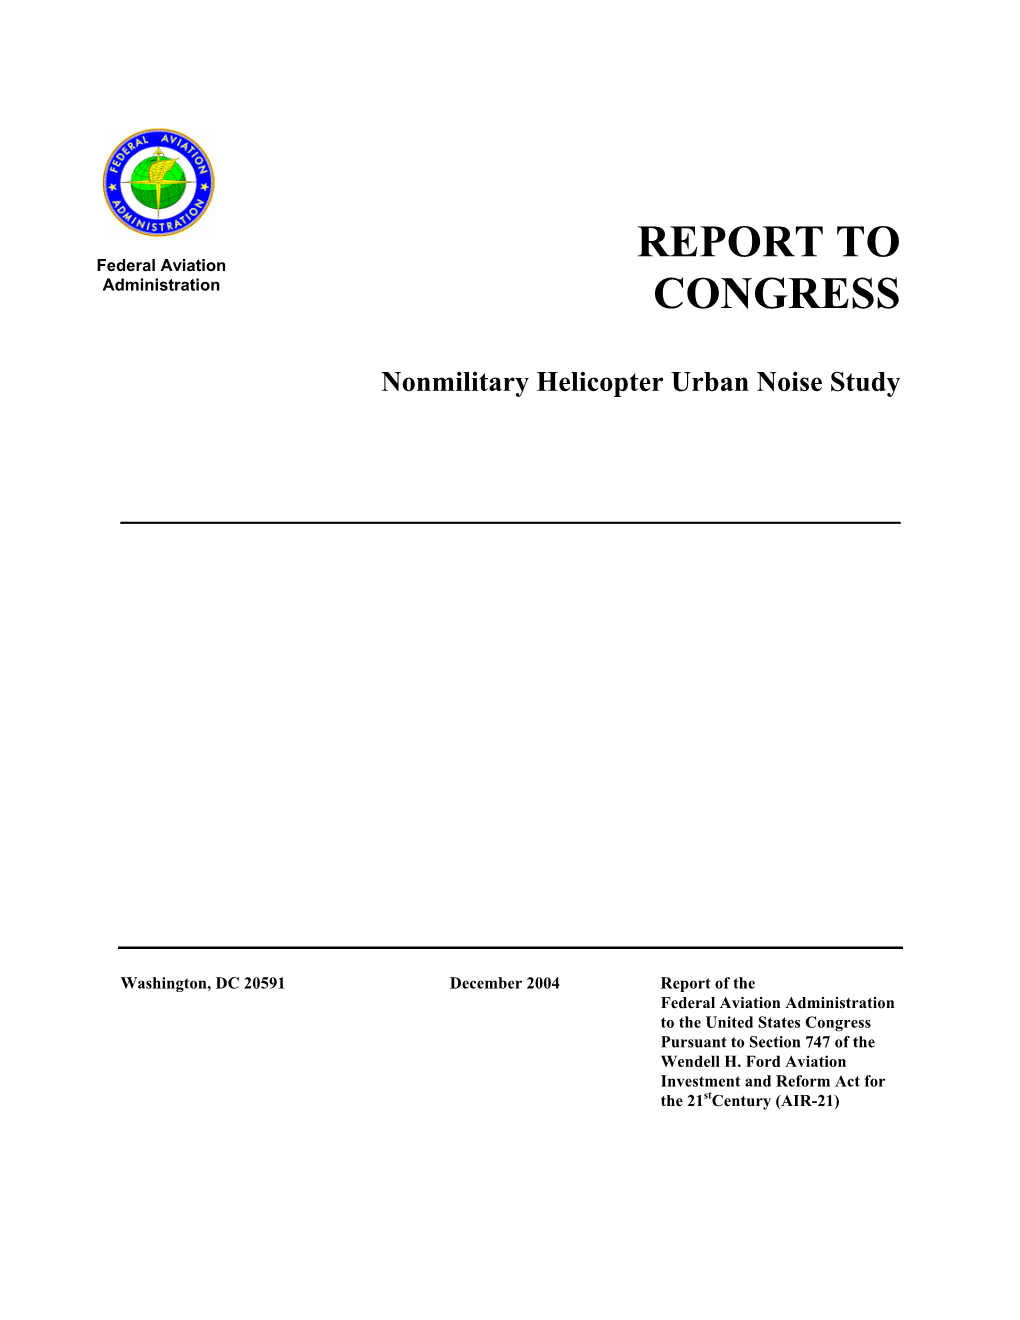 Report to Congress: Nonmilitary Helicopter Urban Noise Study